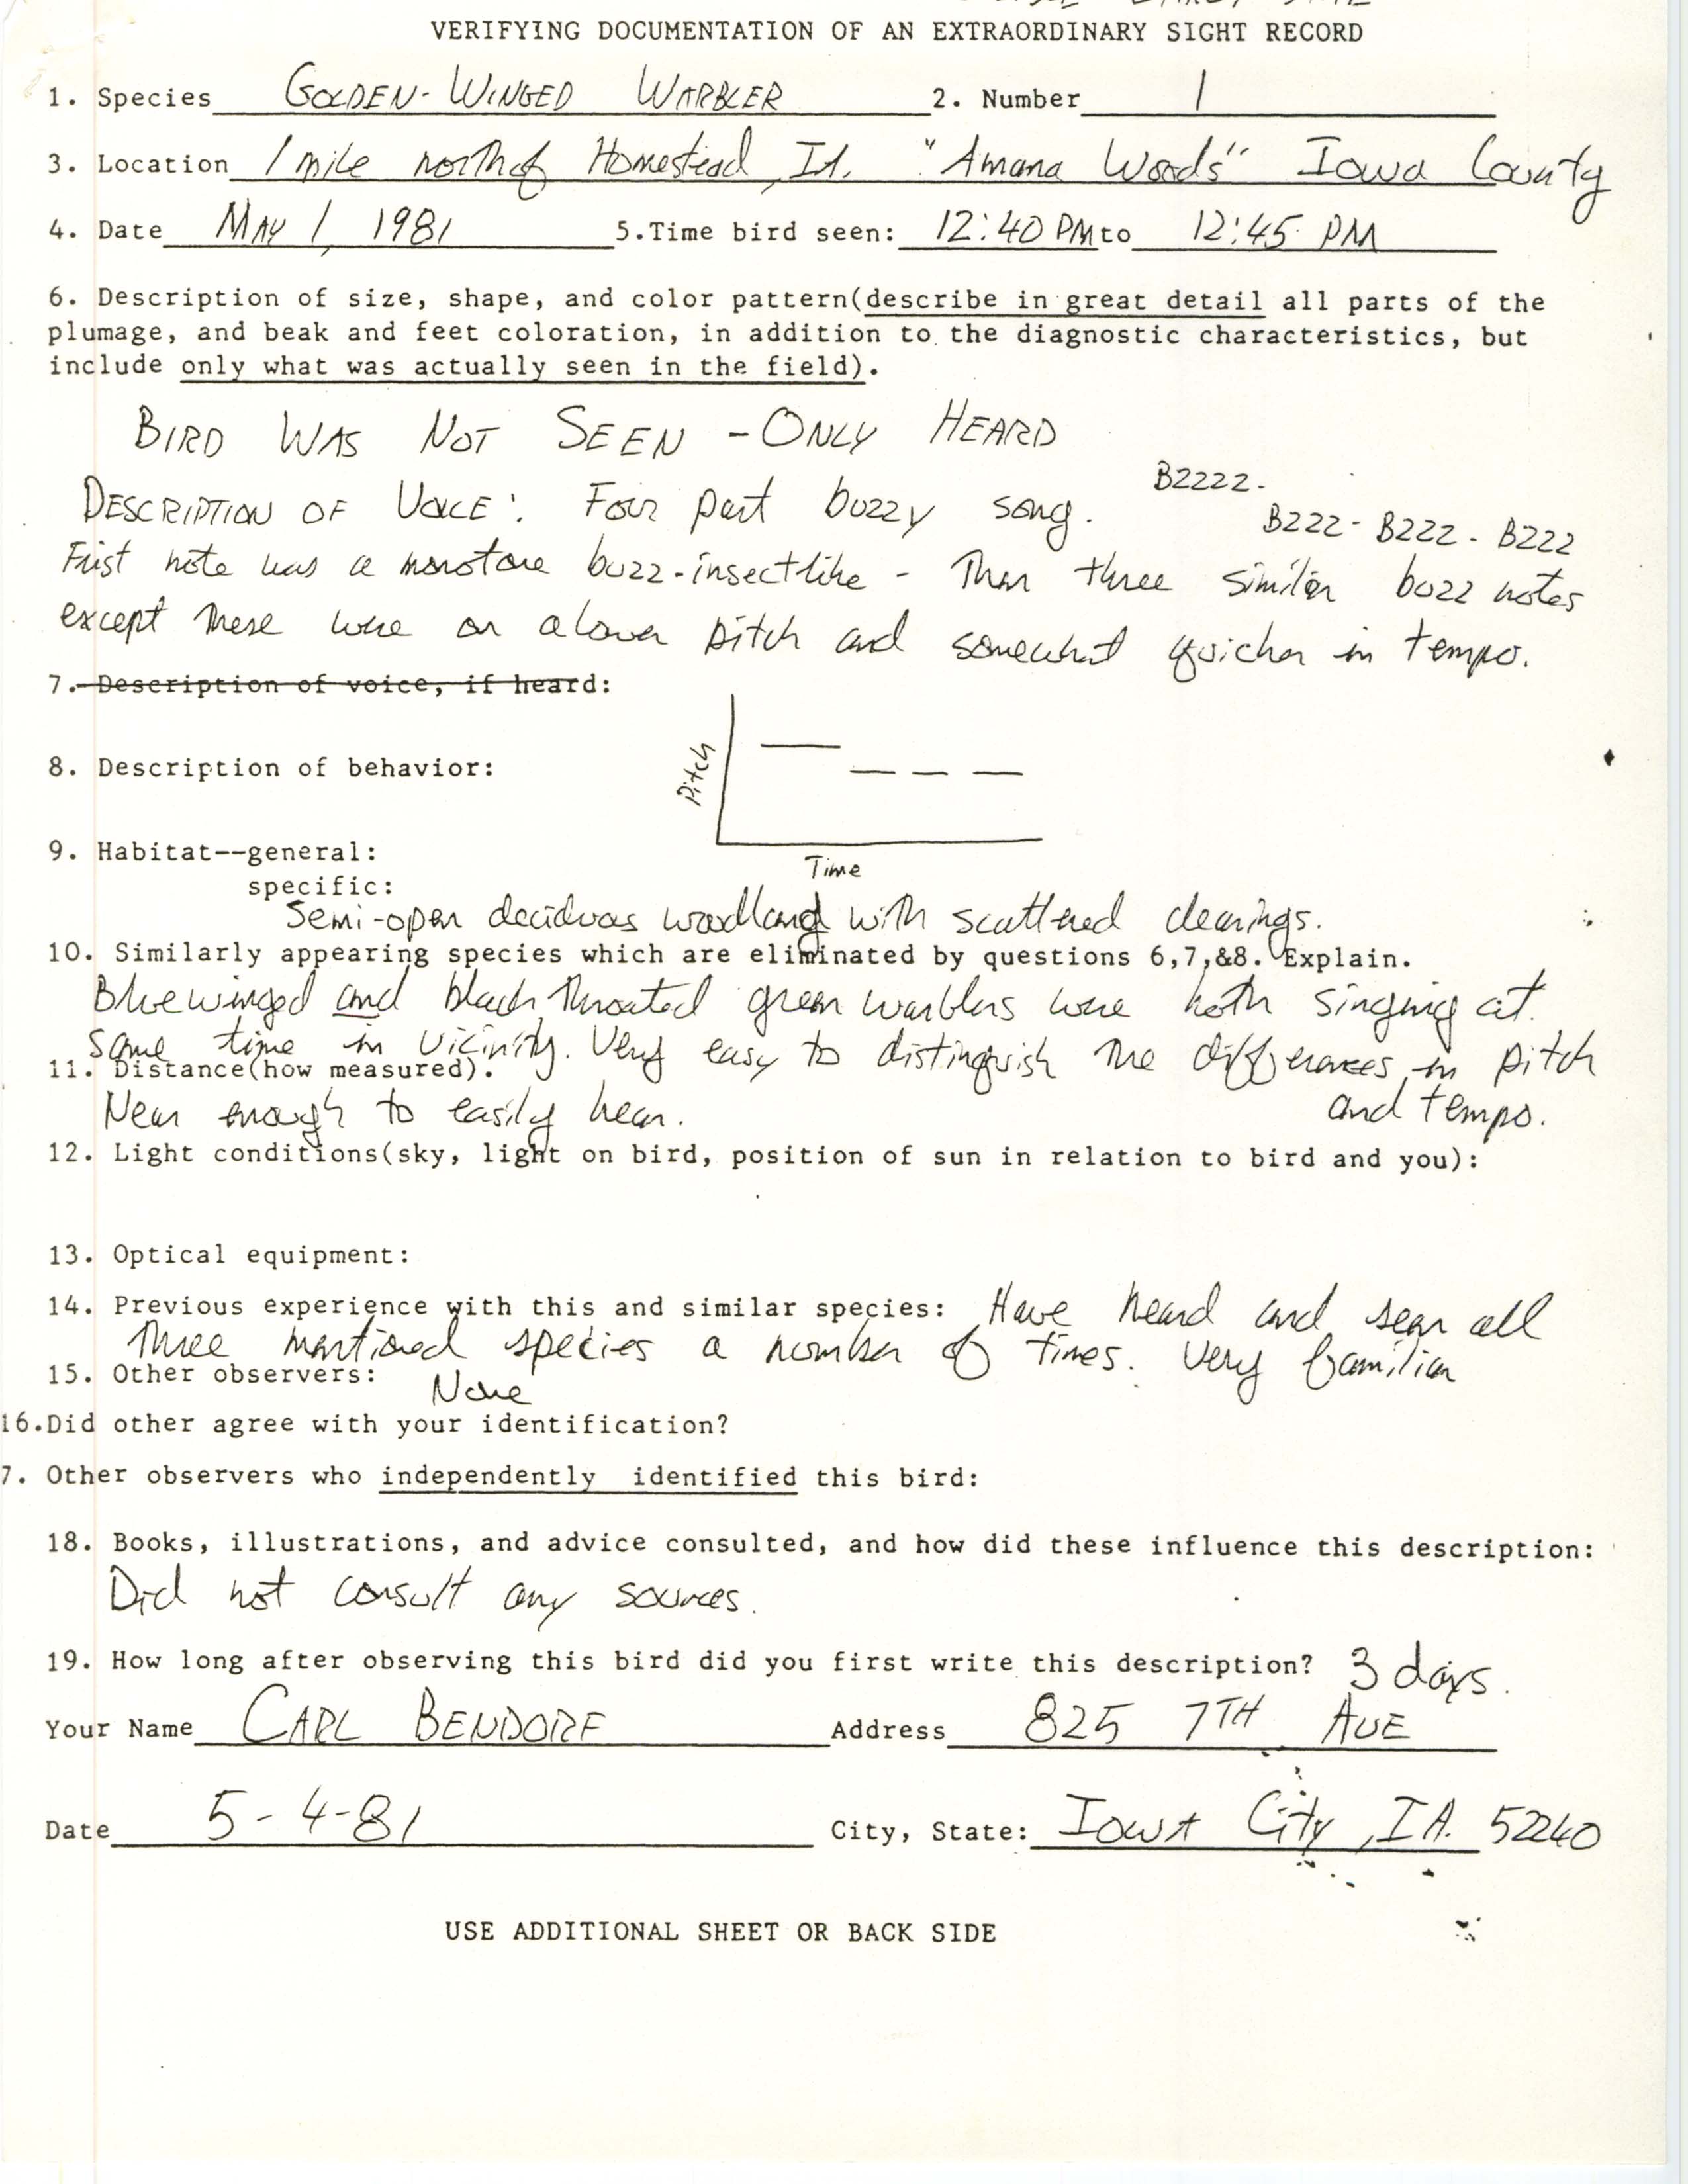 Rare bird documentation form for Golden-winged Warbler at Amana Woods in 1981